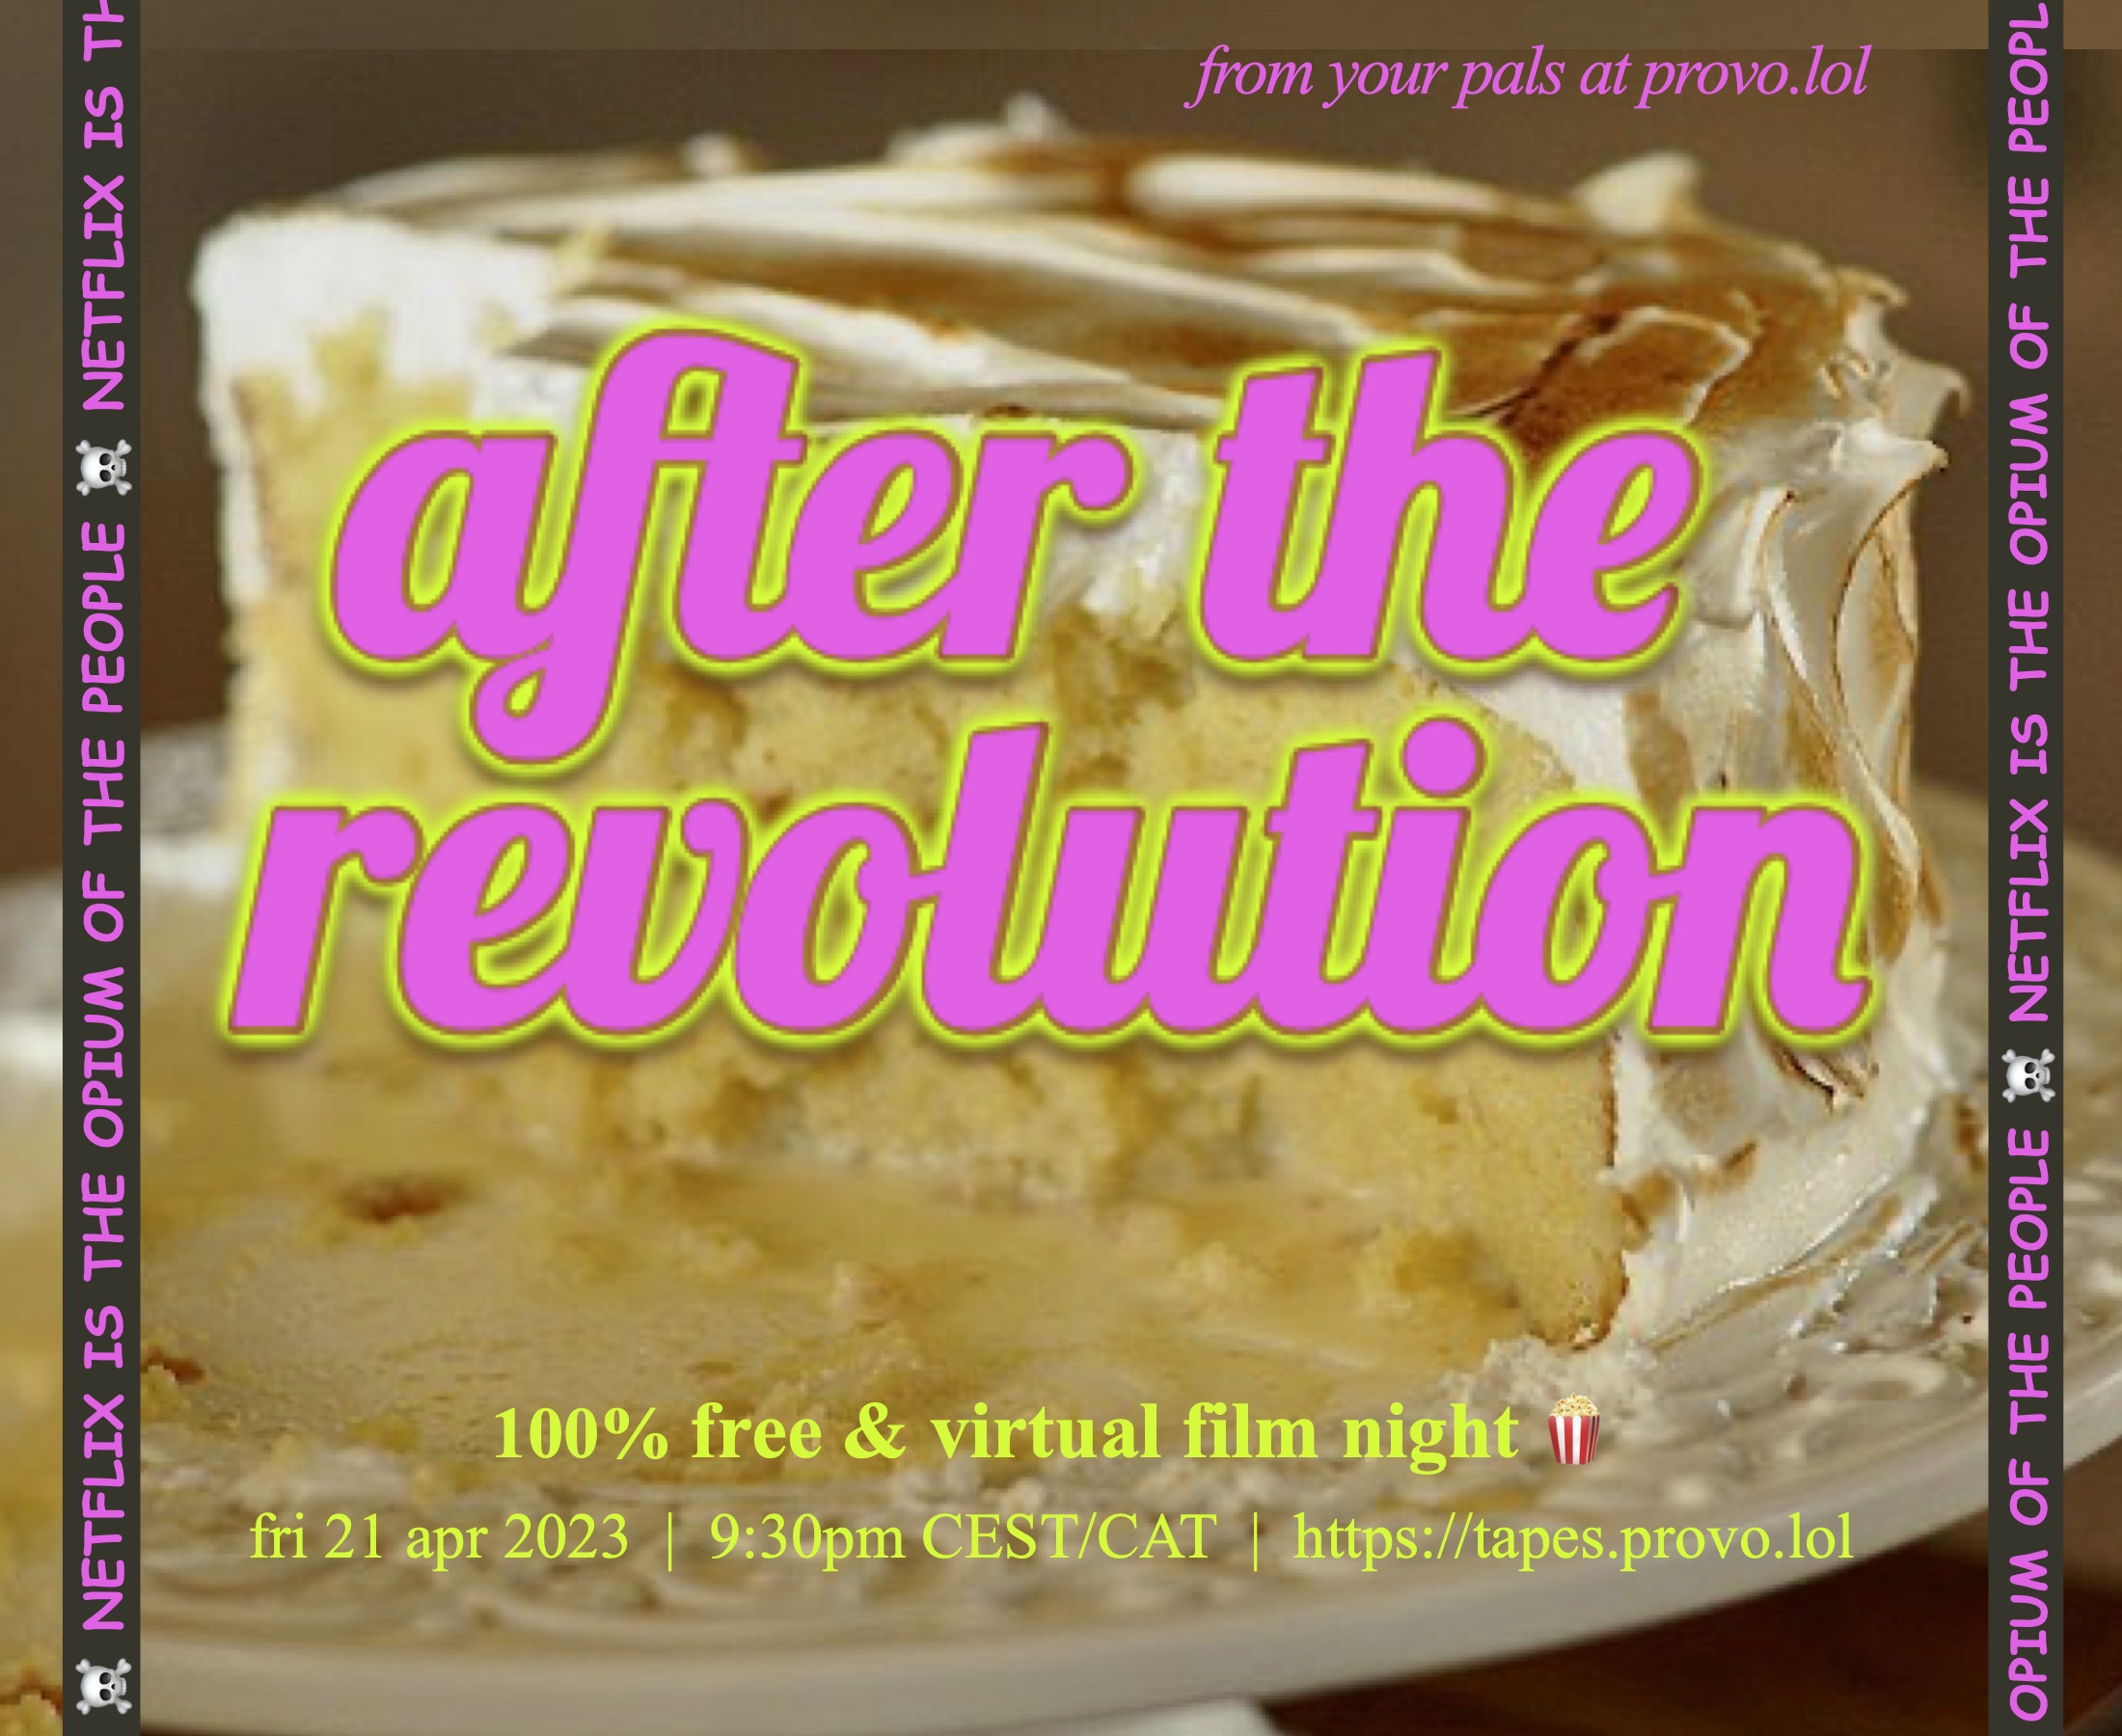 Flyer of the after the revolution film night